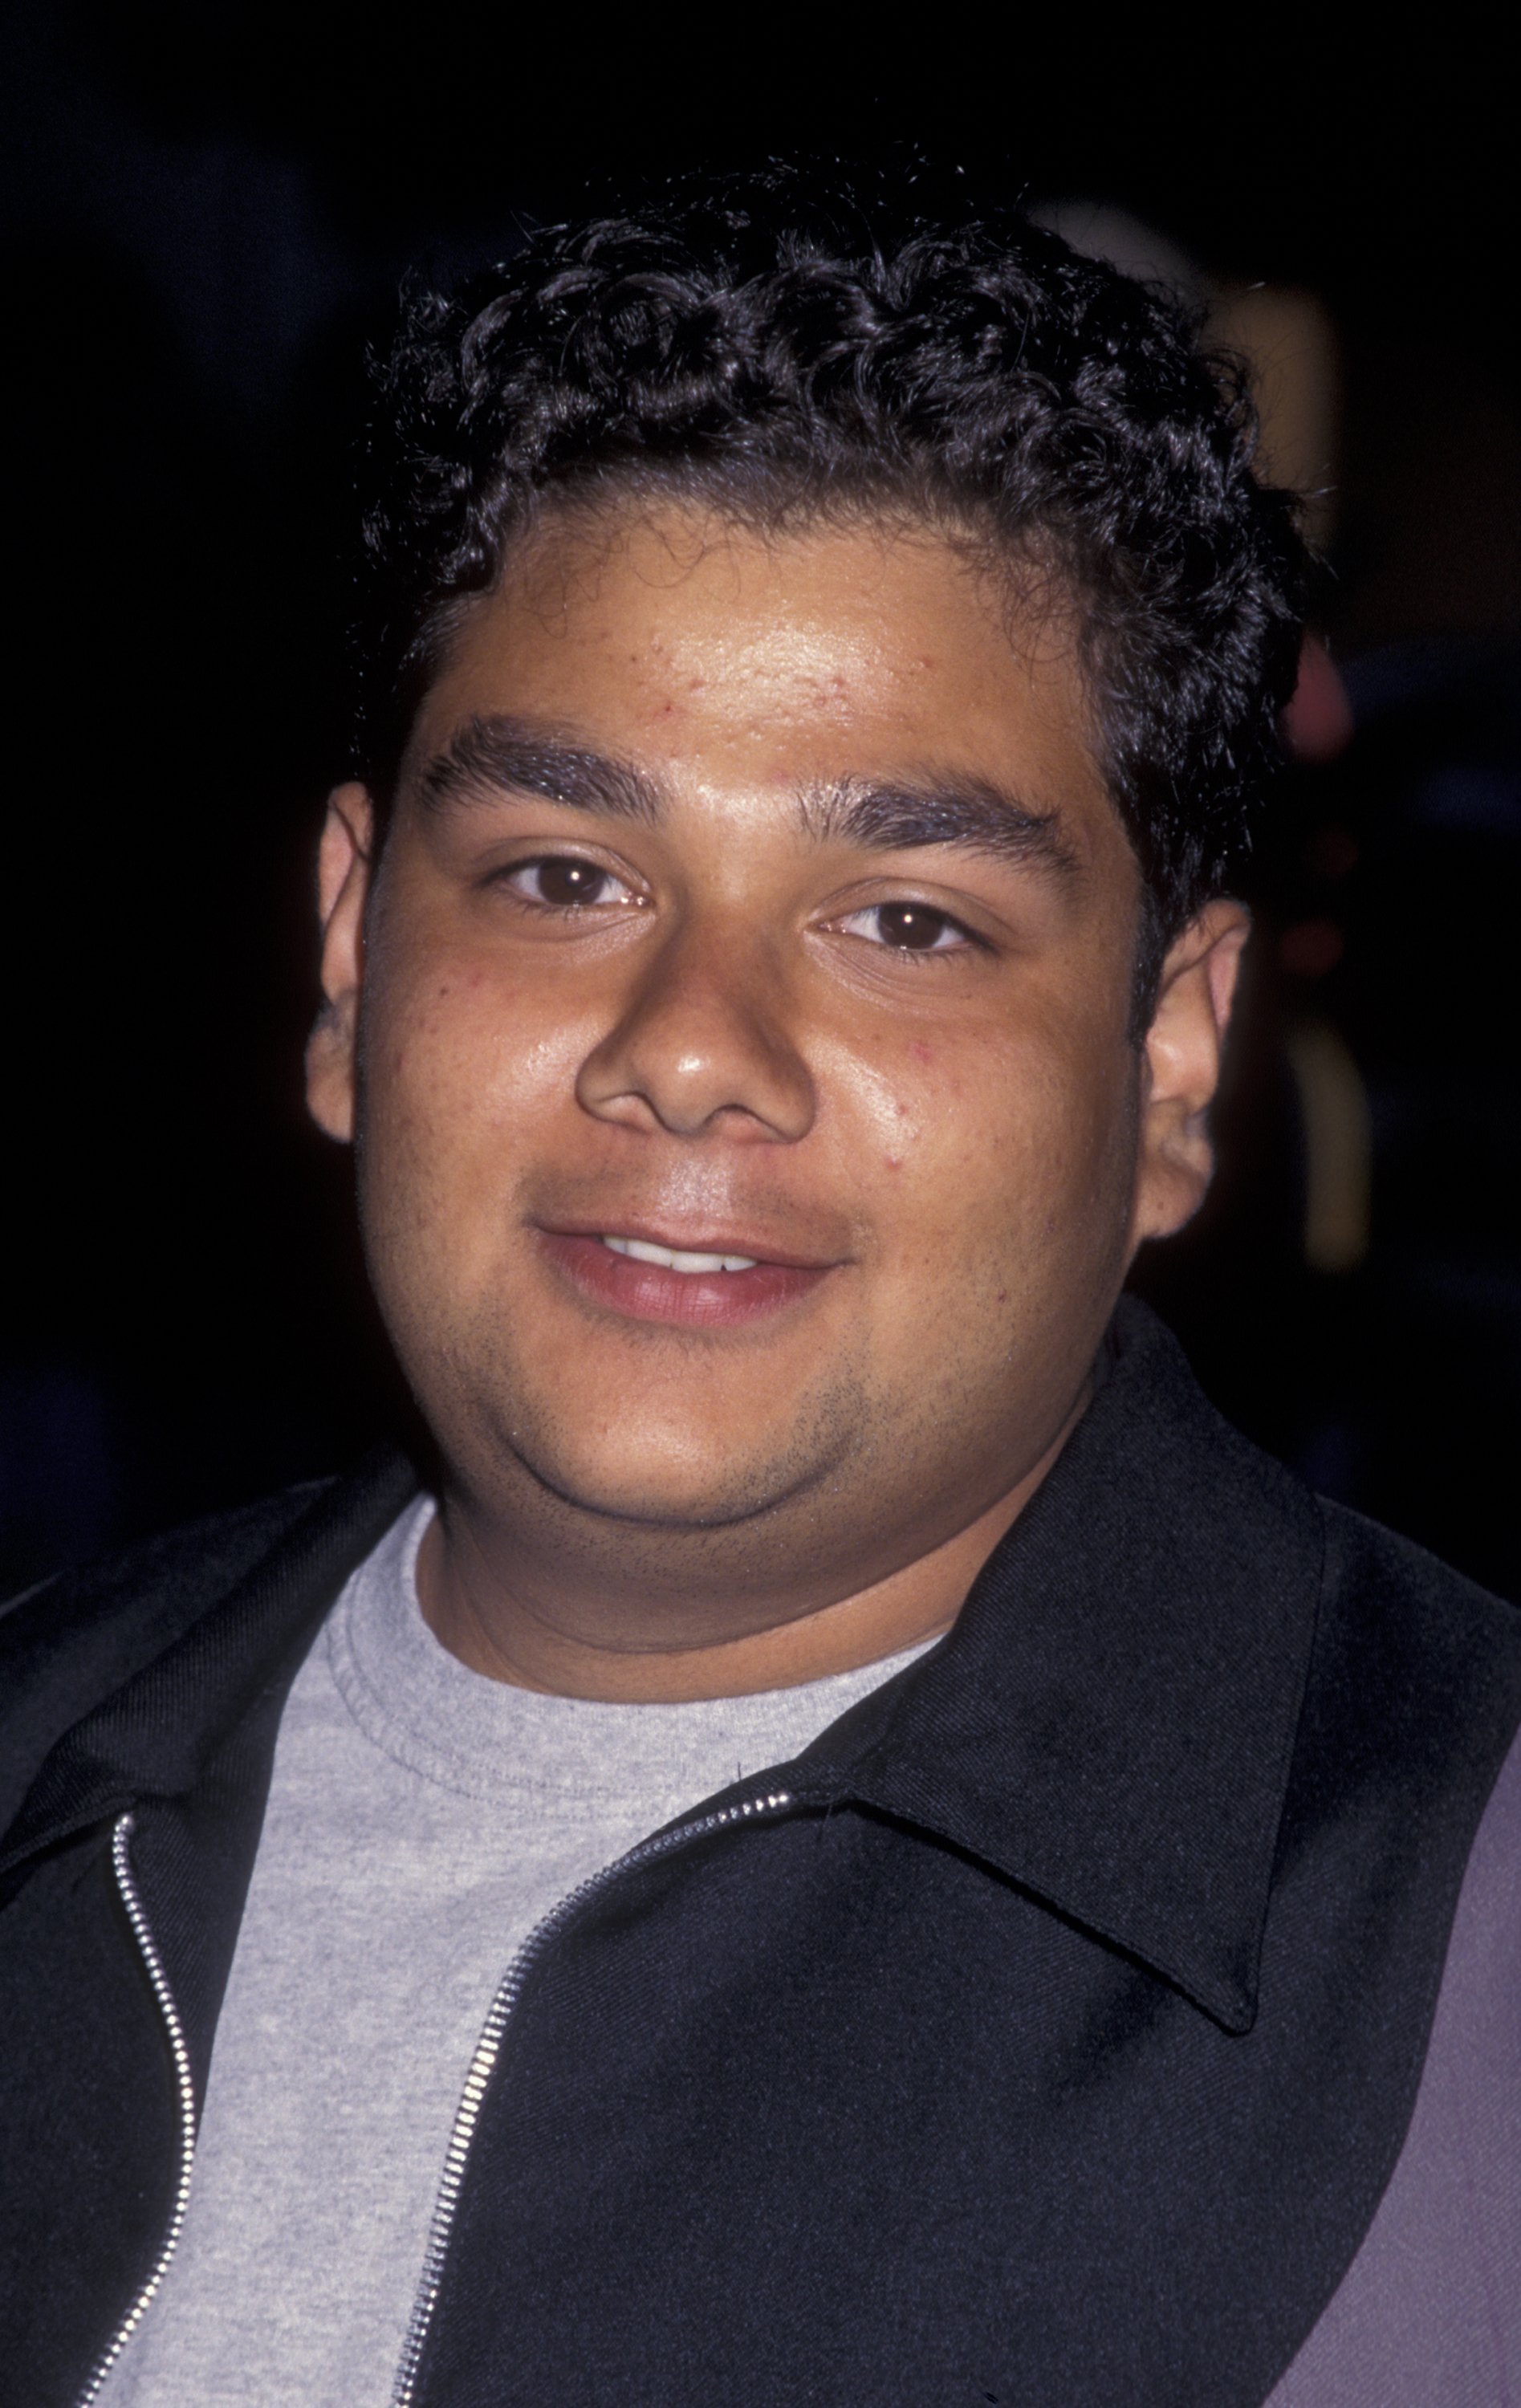 Shaun Weiss attends NBC Summer Press Tour on July 20, 1997 at the Ritz Carlton Hotel in Pasadena, California. | Source: Getty Images